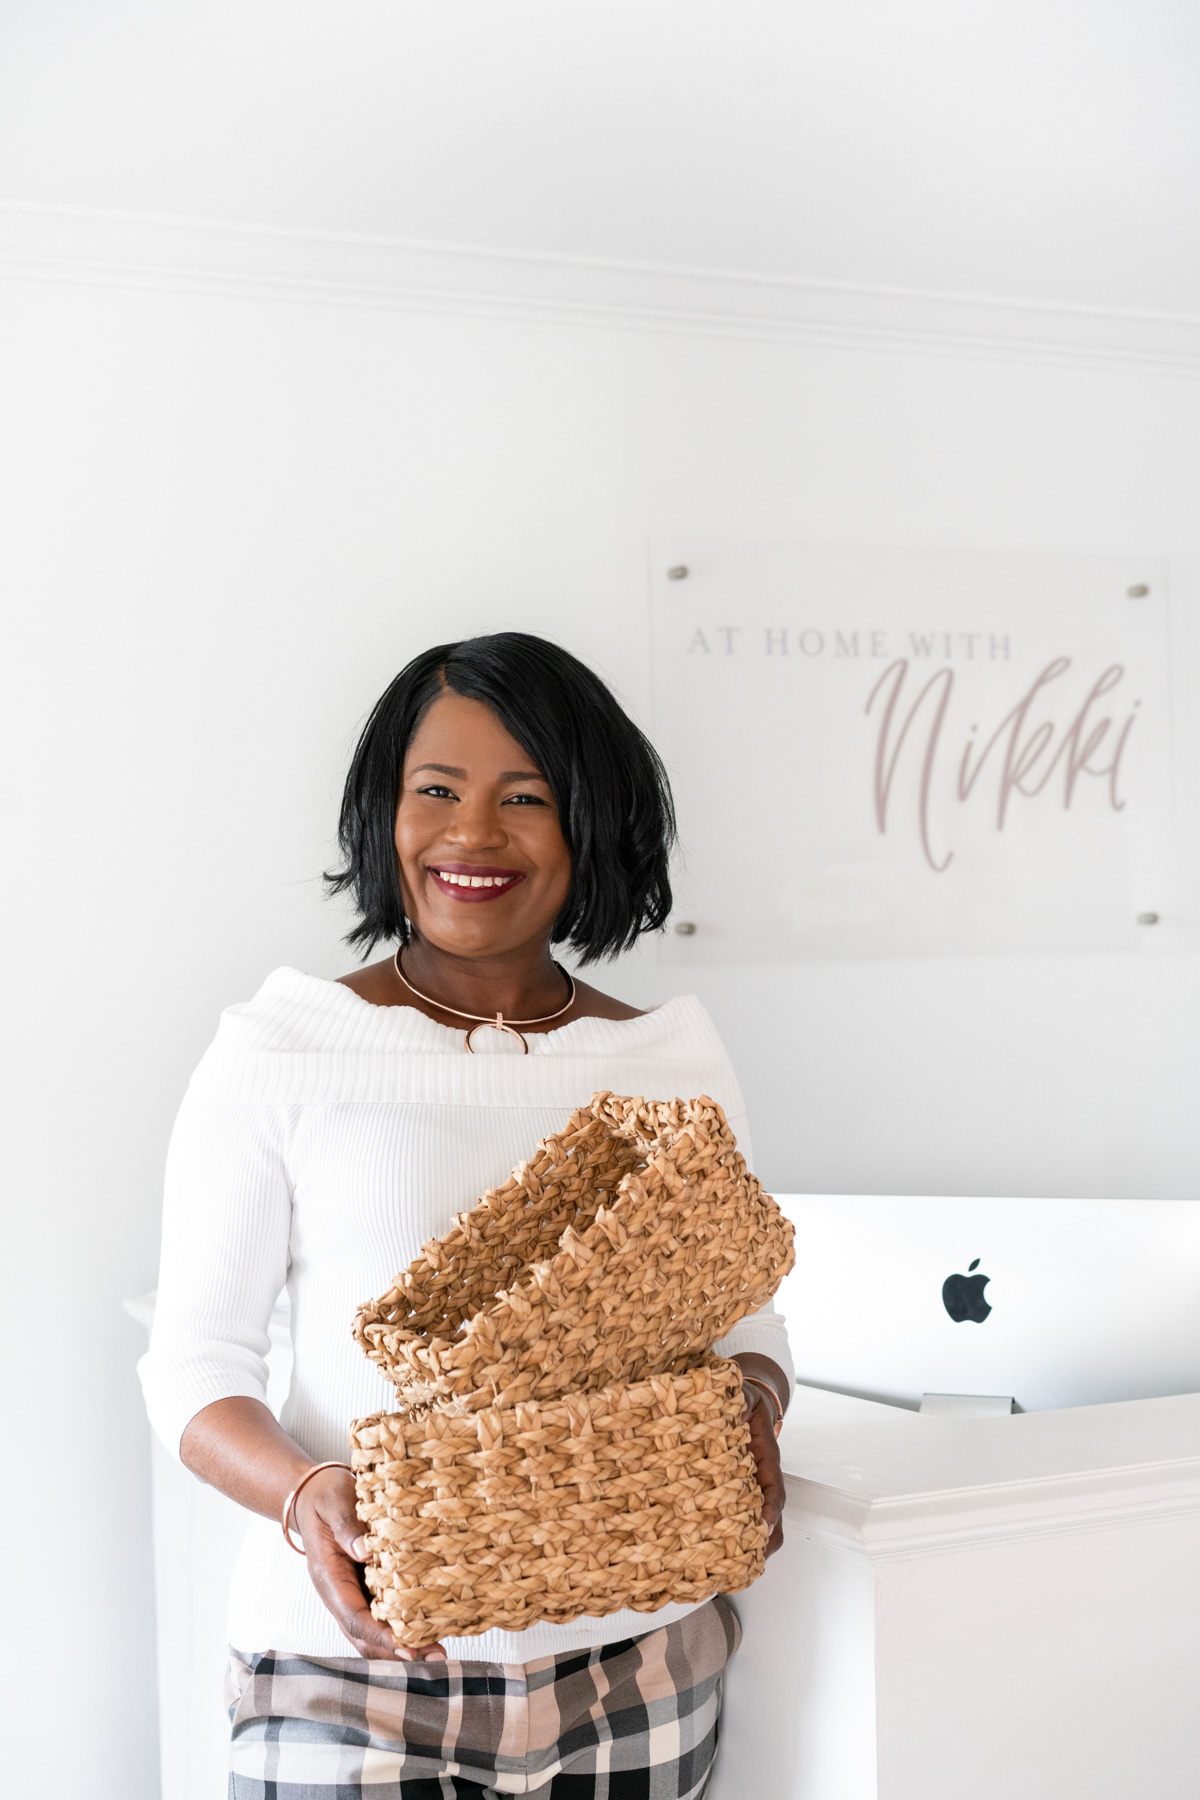 A portrait of professional organizer At Home with Nikki holding two natural woven baskets in front the branded sign in her office. This portrait is an example of how to use props in a personal brand photoshoot. 